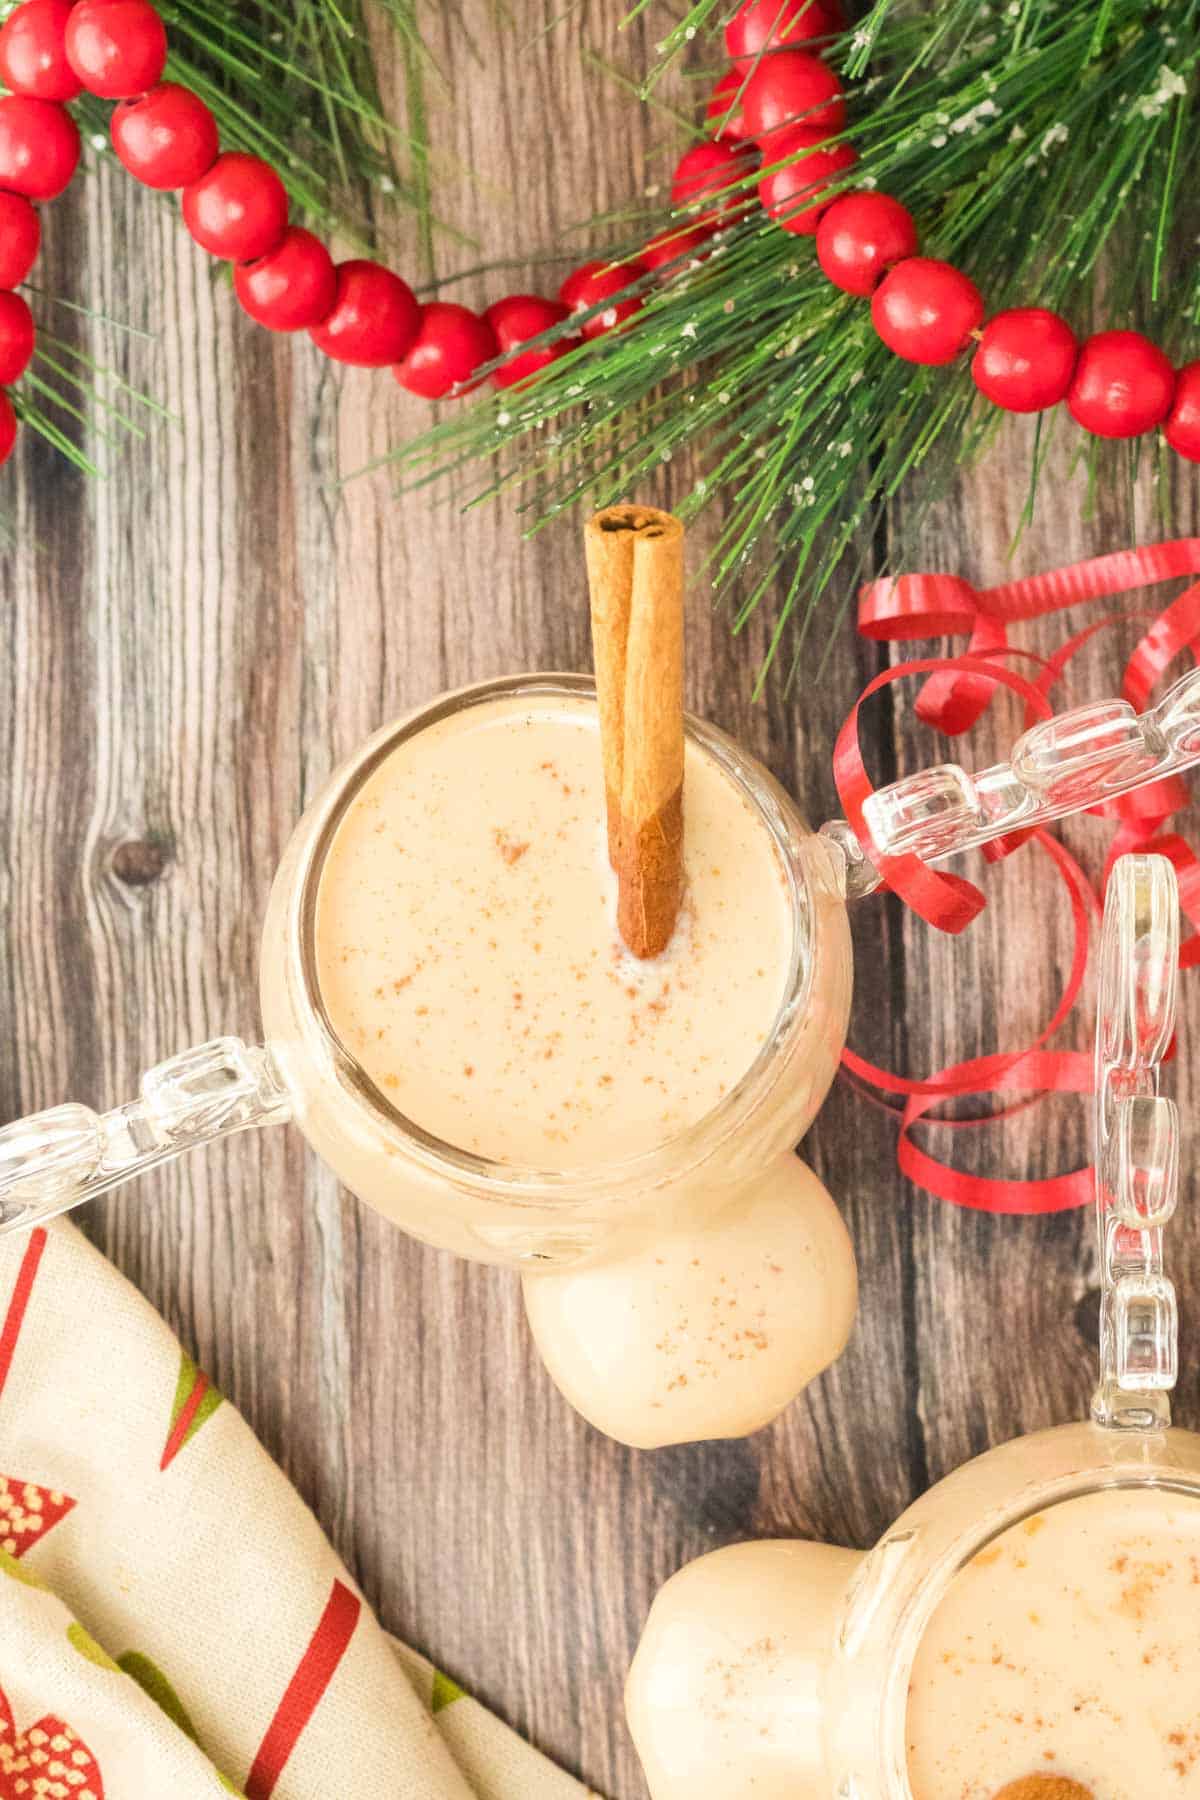 An overhead shot of a cup of eggnog on a wooden table with festive Christmas decor.